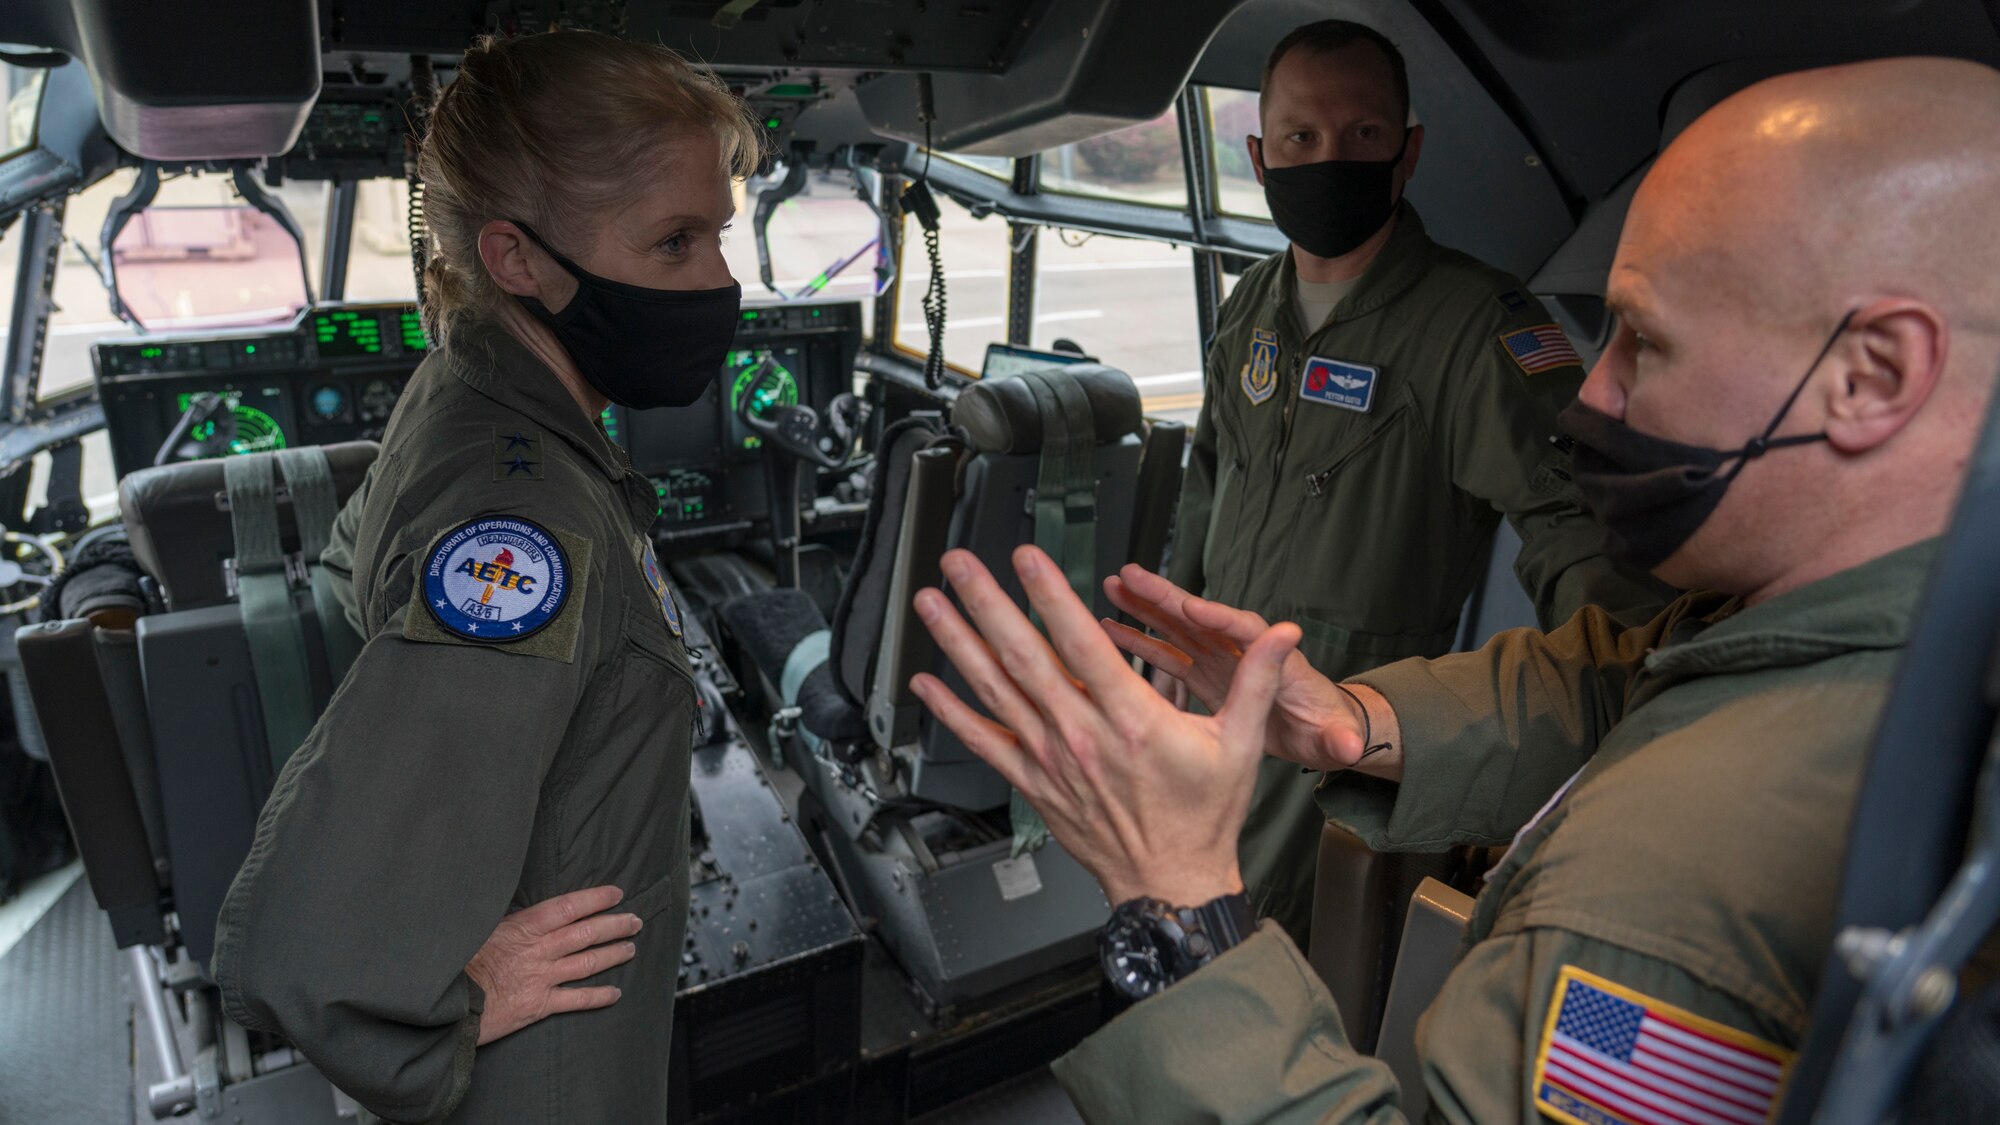 Maj. Gen. Jeannie M. Leavitt, director of operations and communications for the Air and Education Training Command at Joint Base San Antonio-Randolph, Texas, learns about the 53rd Weather Reconnaissance Squadron "Hurricane Hunters" from Capt. Peyton Eustis (center), pilot for the 53rd WRS, and Master Sgt. Ed Scherzer (right), loadmaster for the 53rd WRS, during a visit at Keesler Air Force Base, Miss., March 19, 2021. After joining the Air Force in 1992, Leavitt became the branch's first female fighter pilot in 1993. She visited the 81st Training Wing and the Air Force Reserve's 403rd Wing, and she spoke to members of Team Keesler during an event recognizing International Women's History Month. (U.S. Air Force photo by Staff Sgt. Kristen Pittman)